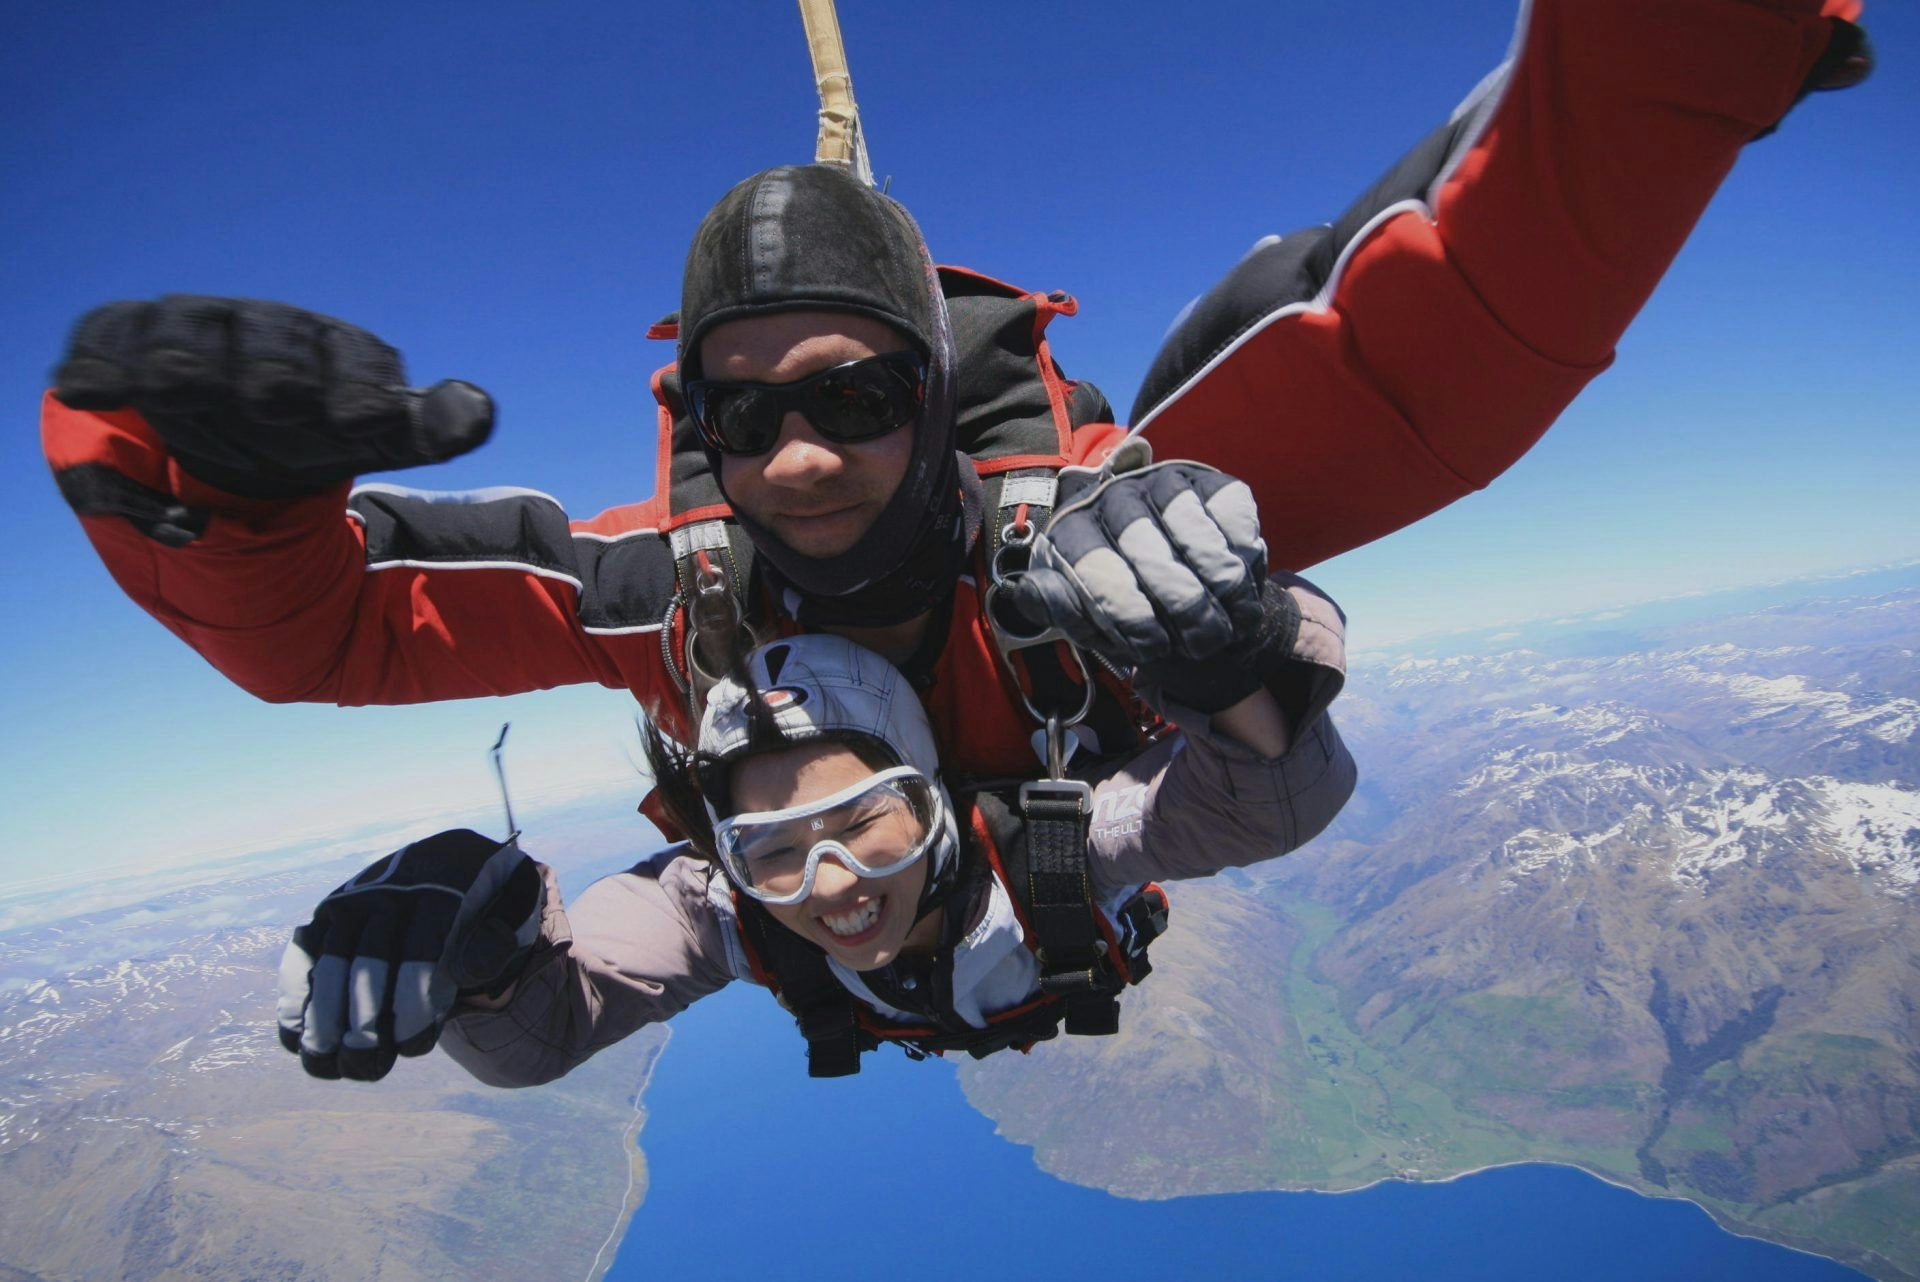 New Zealand Suffers Shortage of Skydiving Instructors as Chinese Adventure Travel Takes Off